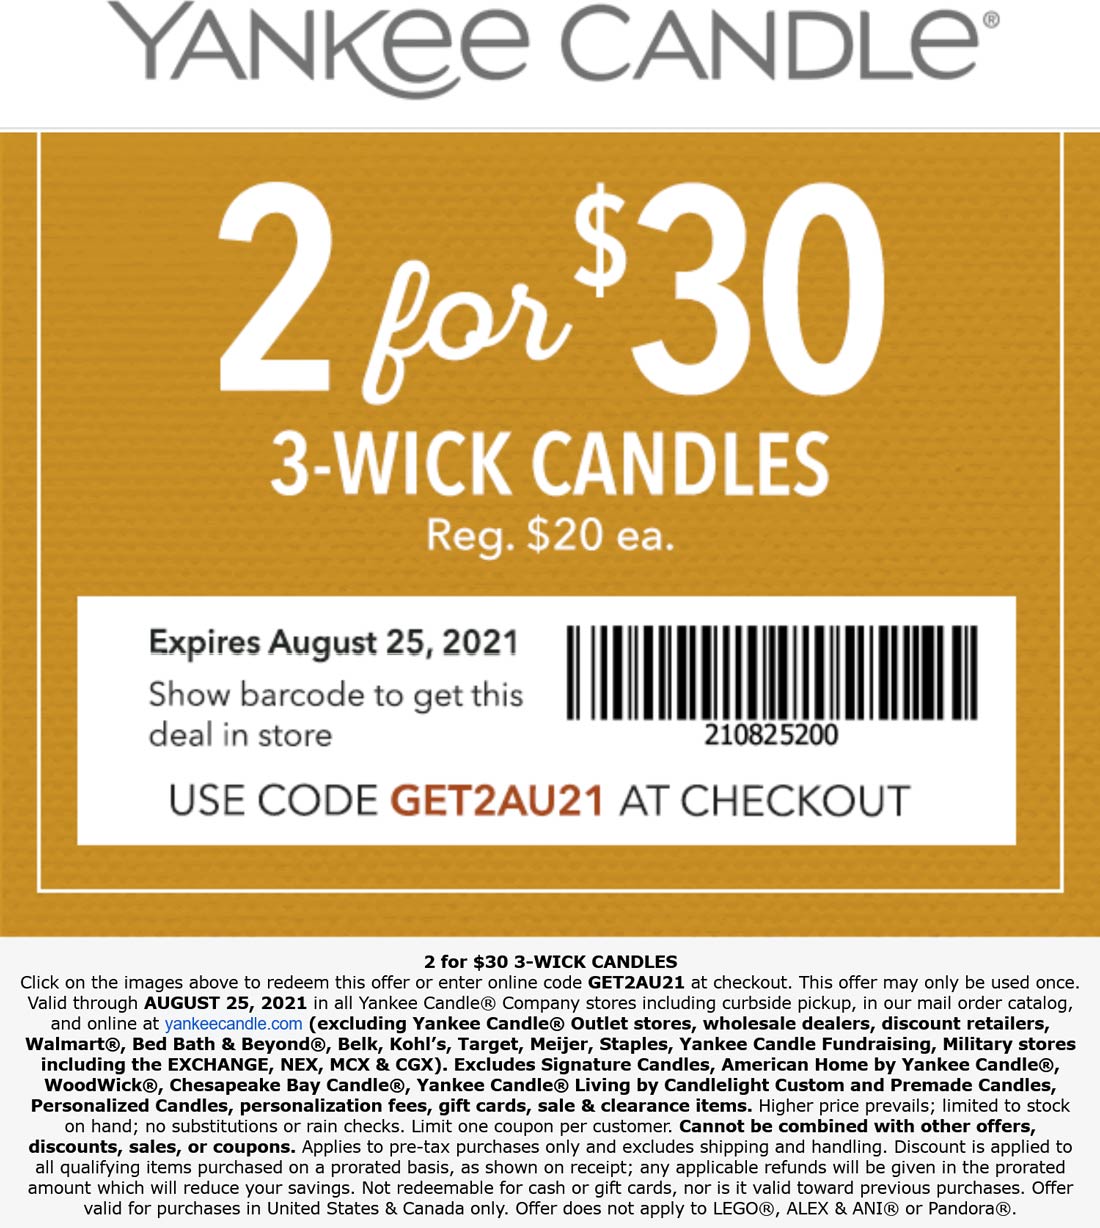 Yankee Candle stores Coupon  2 for $30 on 3-wick candles today at Yankee Candle, or online via promo code GET2AU21 #yankeecandle 